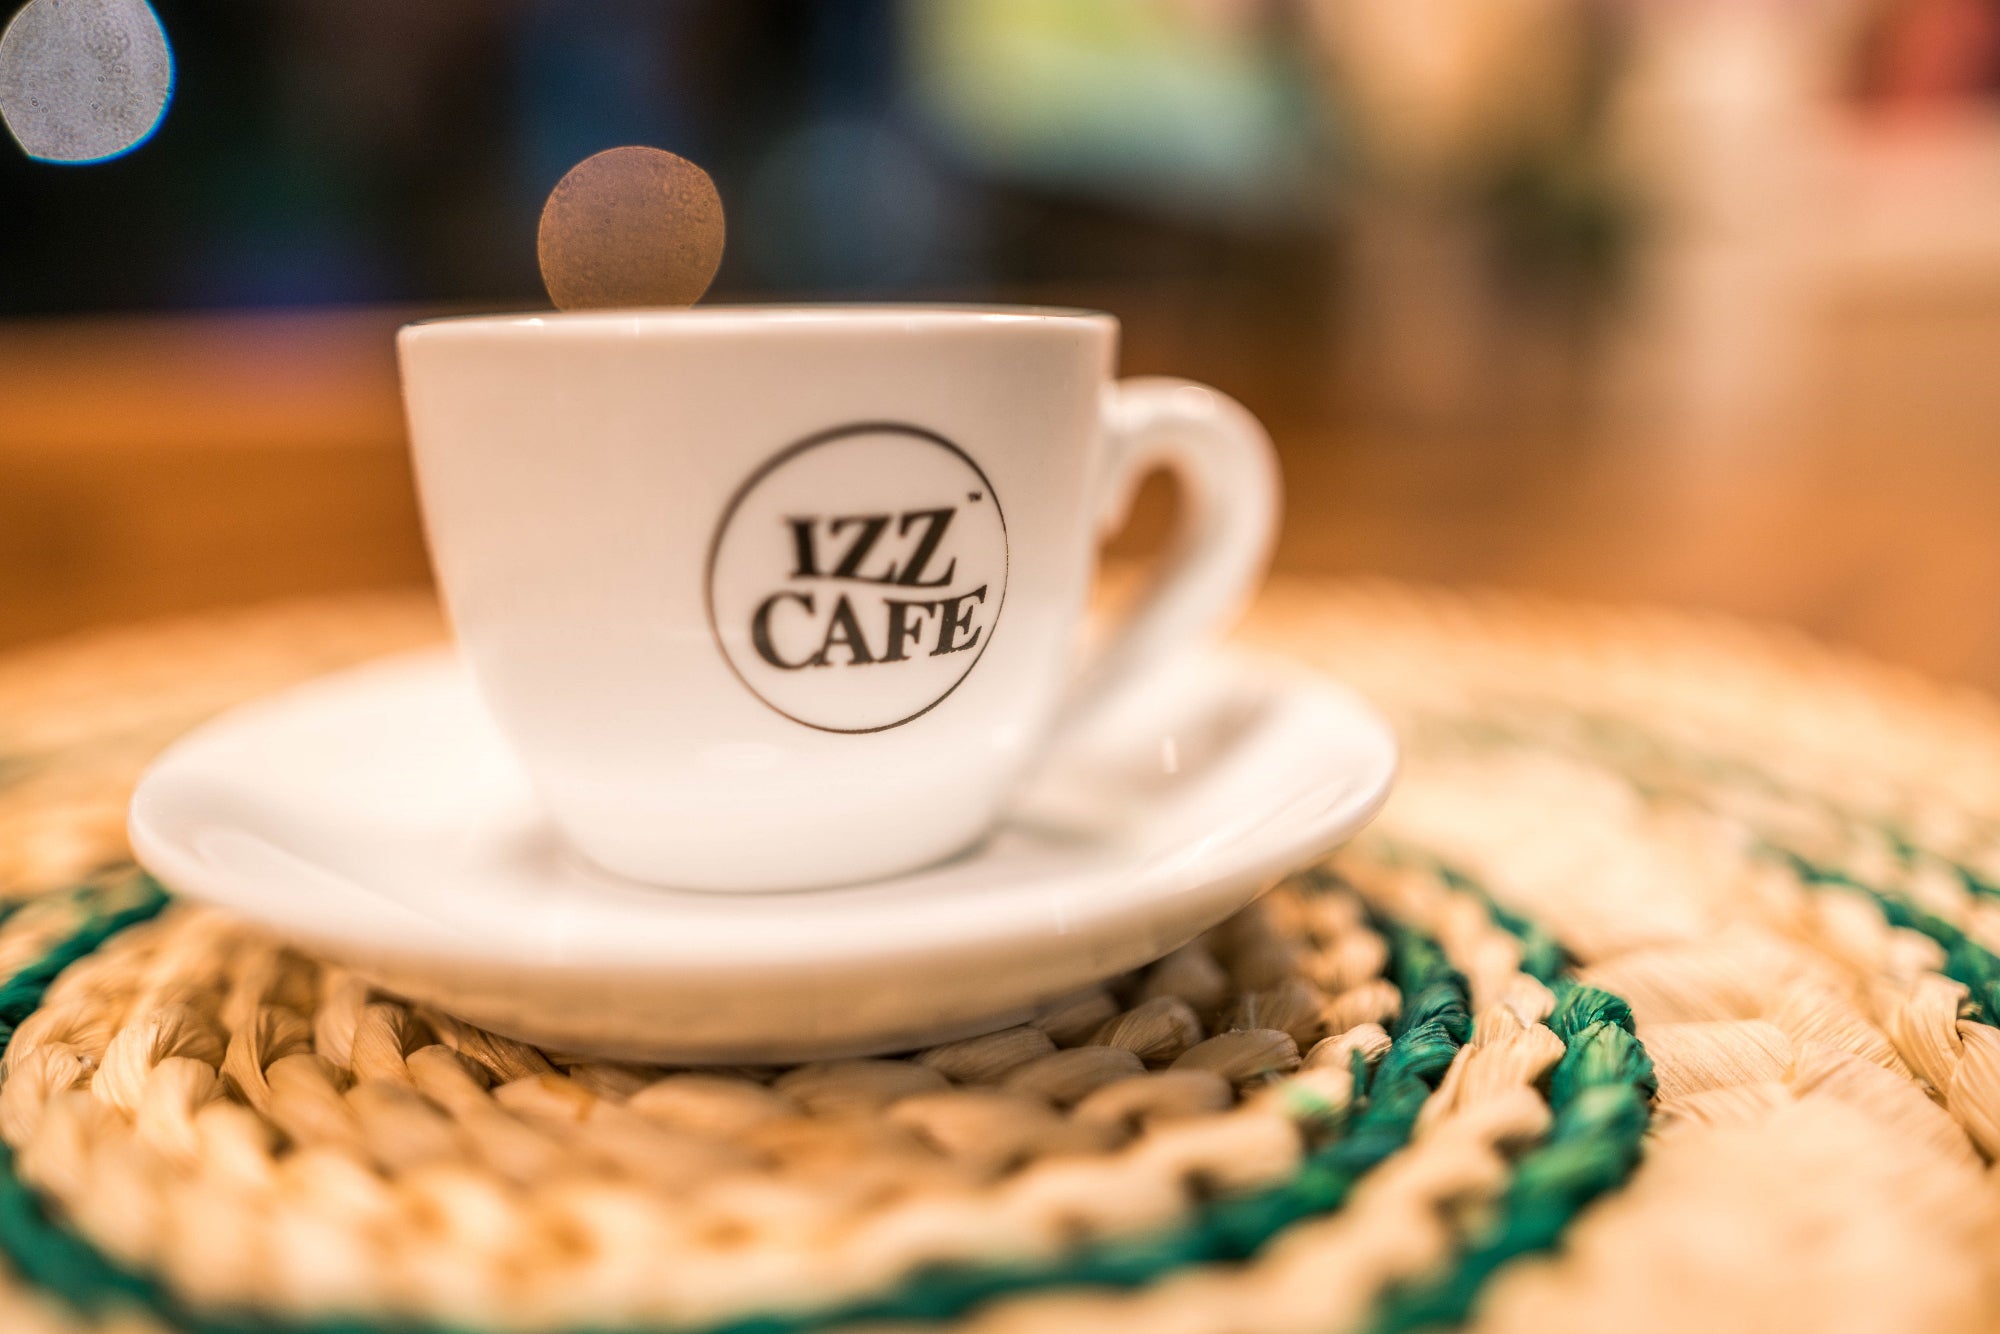 Izz Cafe coffee cup with a saucer